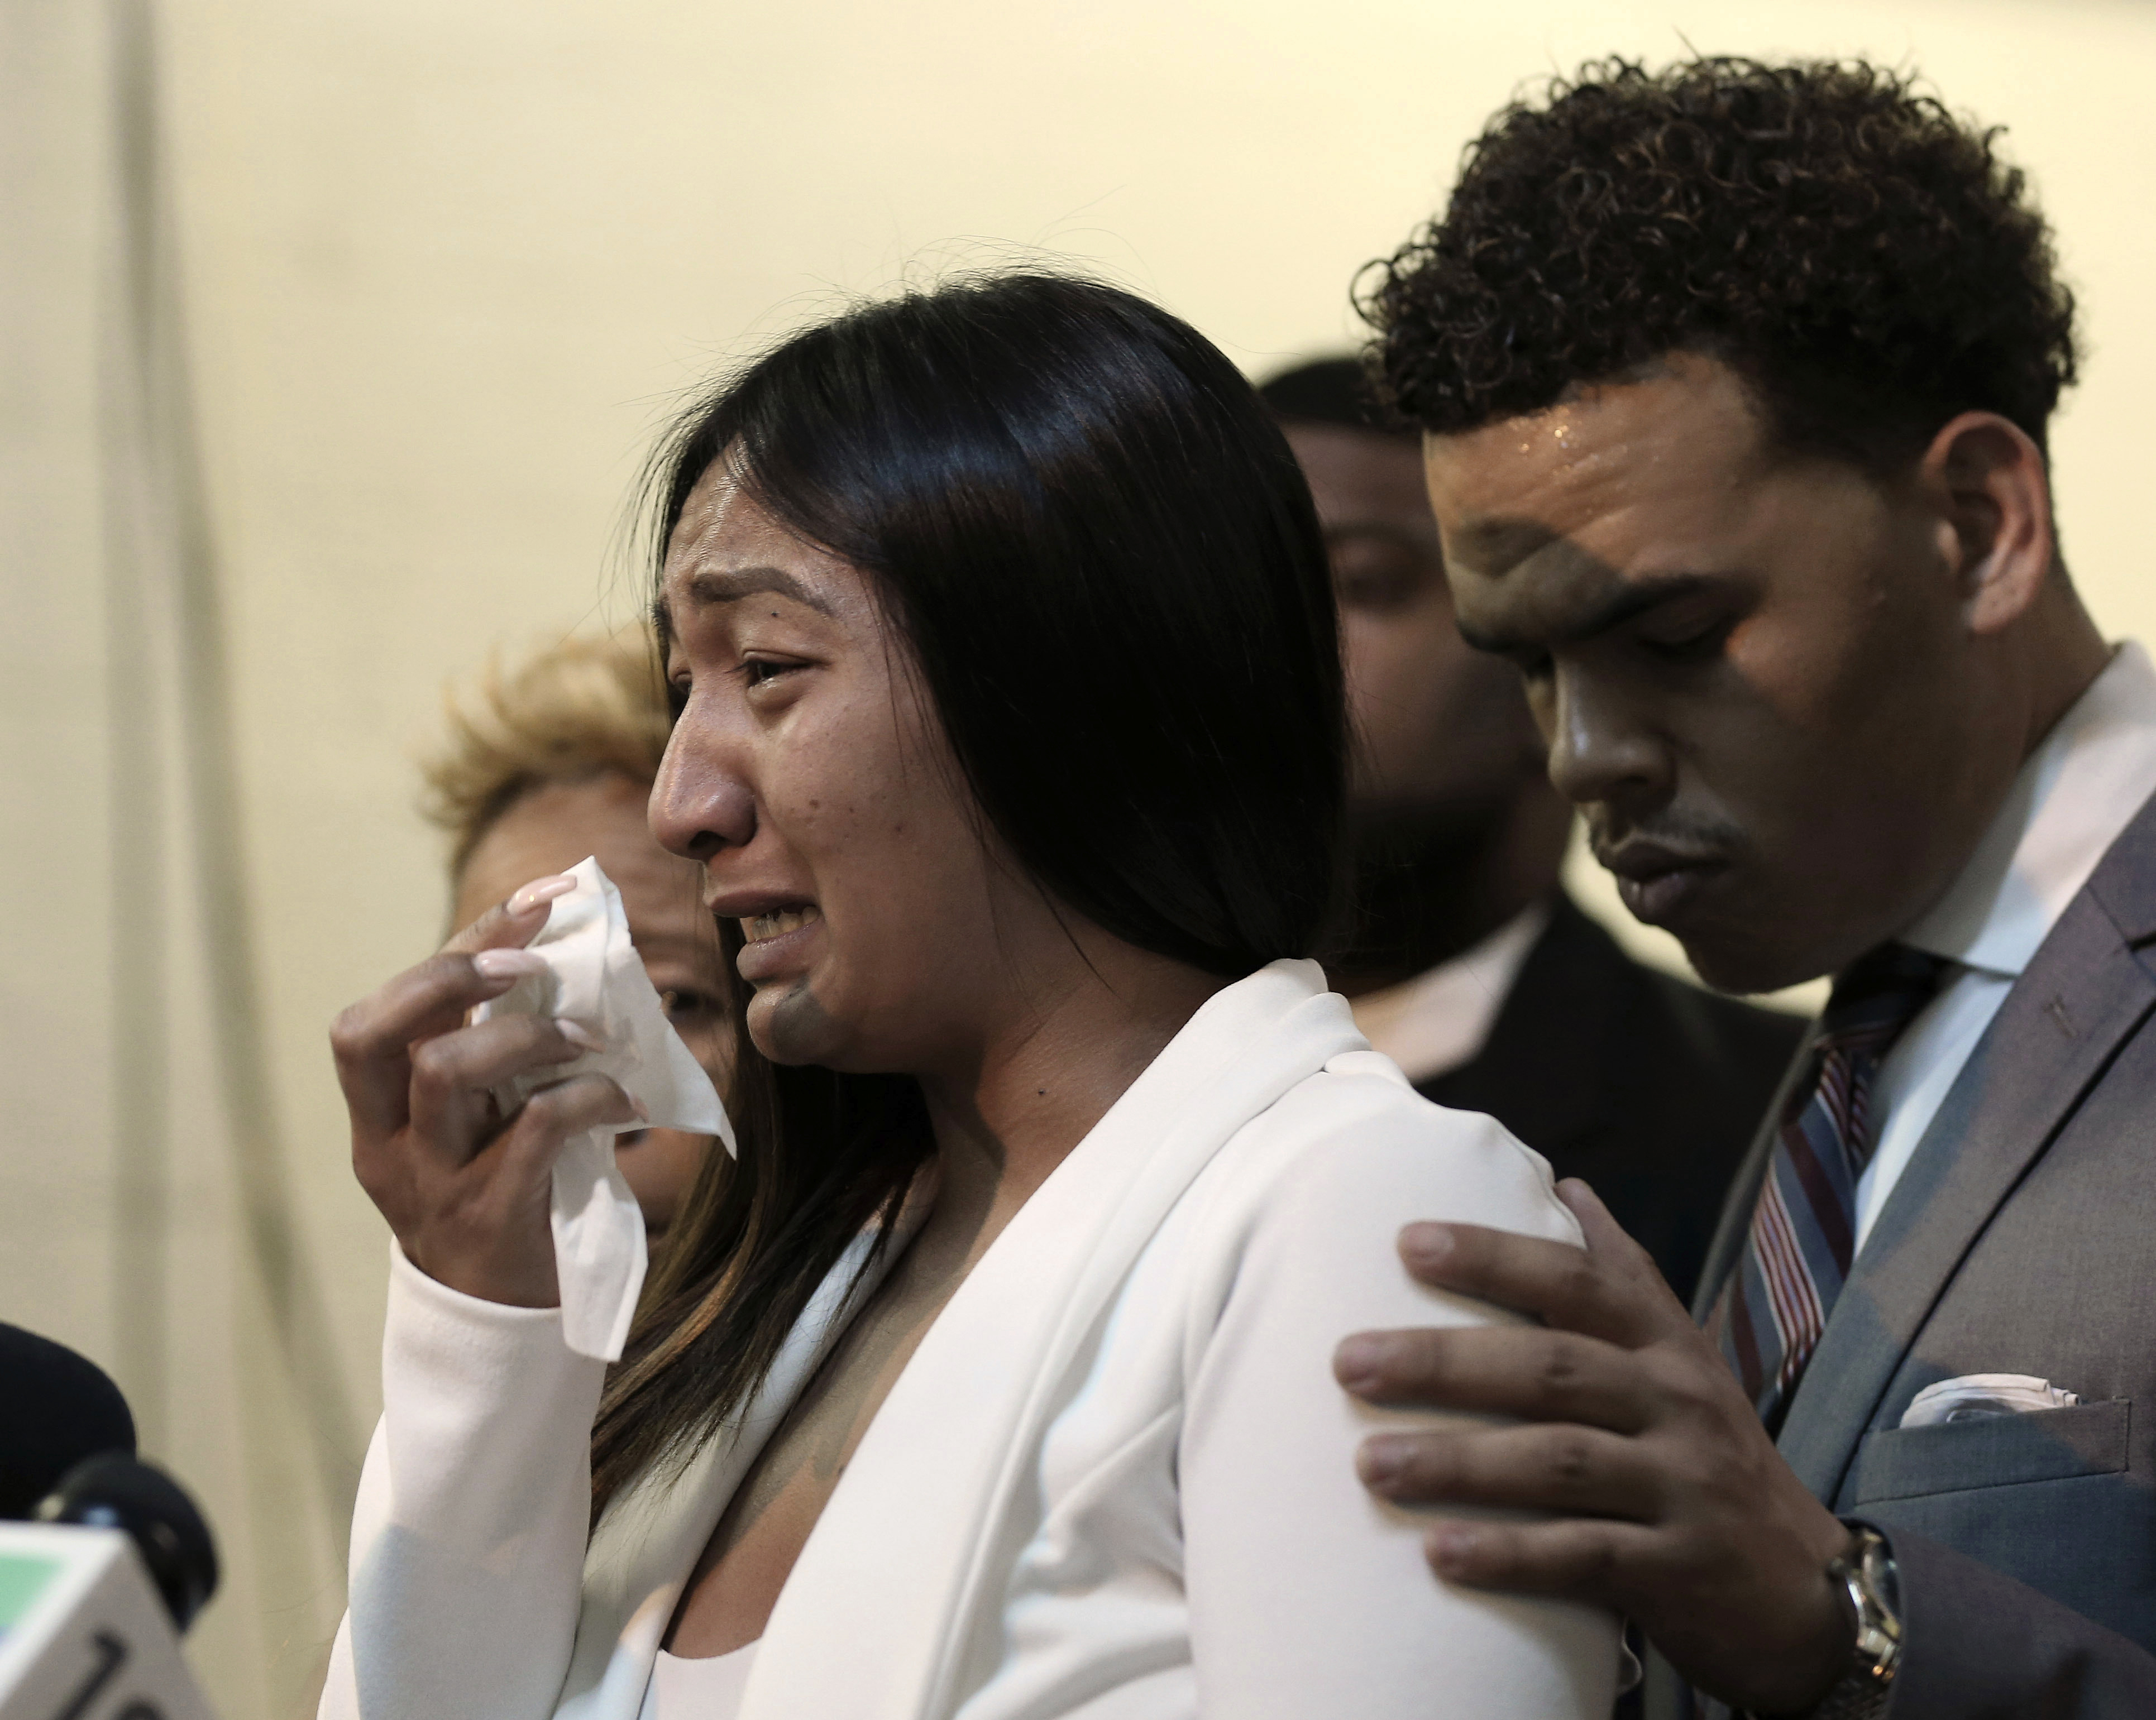 Salena Manni, the fiancee of Stephon Clark, who was shot and killed by Sacramento police in 2018, cries as she discusses the decision to not file charges against the two officers involved, during a news conference in Sacramento, Calif., Saturday, March 2, 2019. (Rich Pedroncelli&mdash;AP)